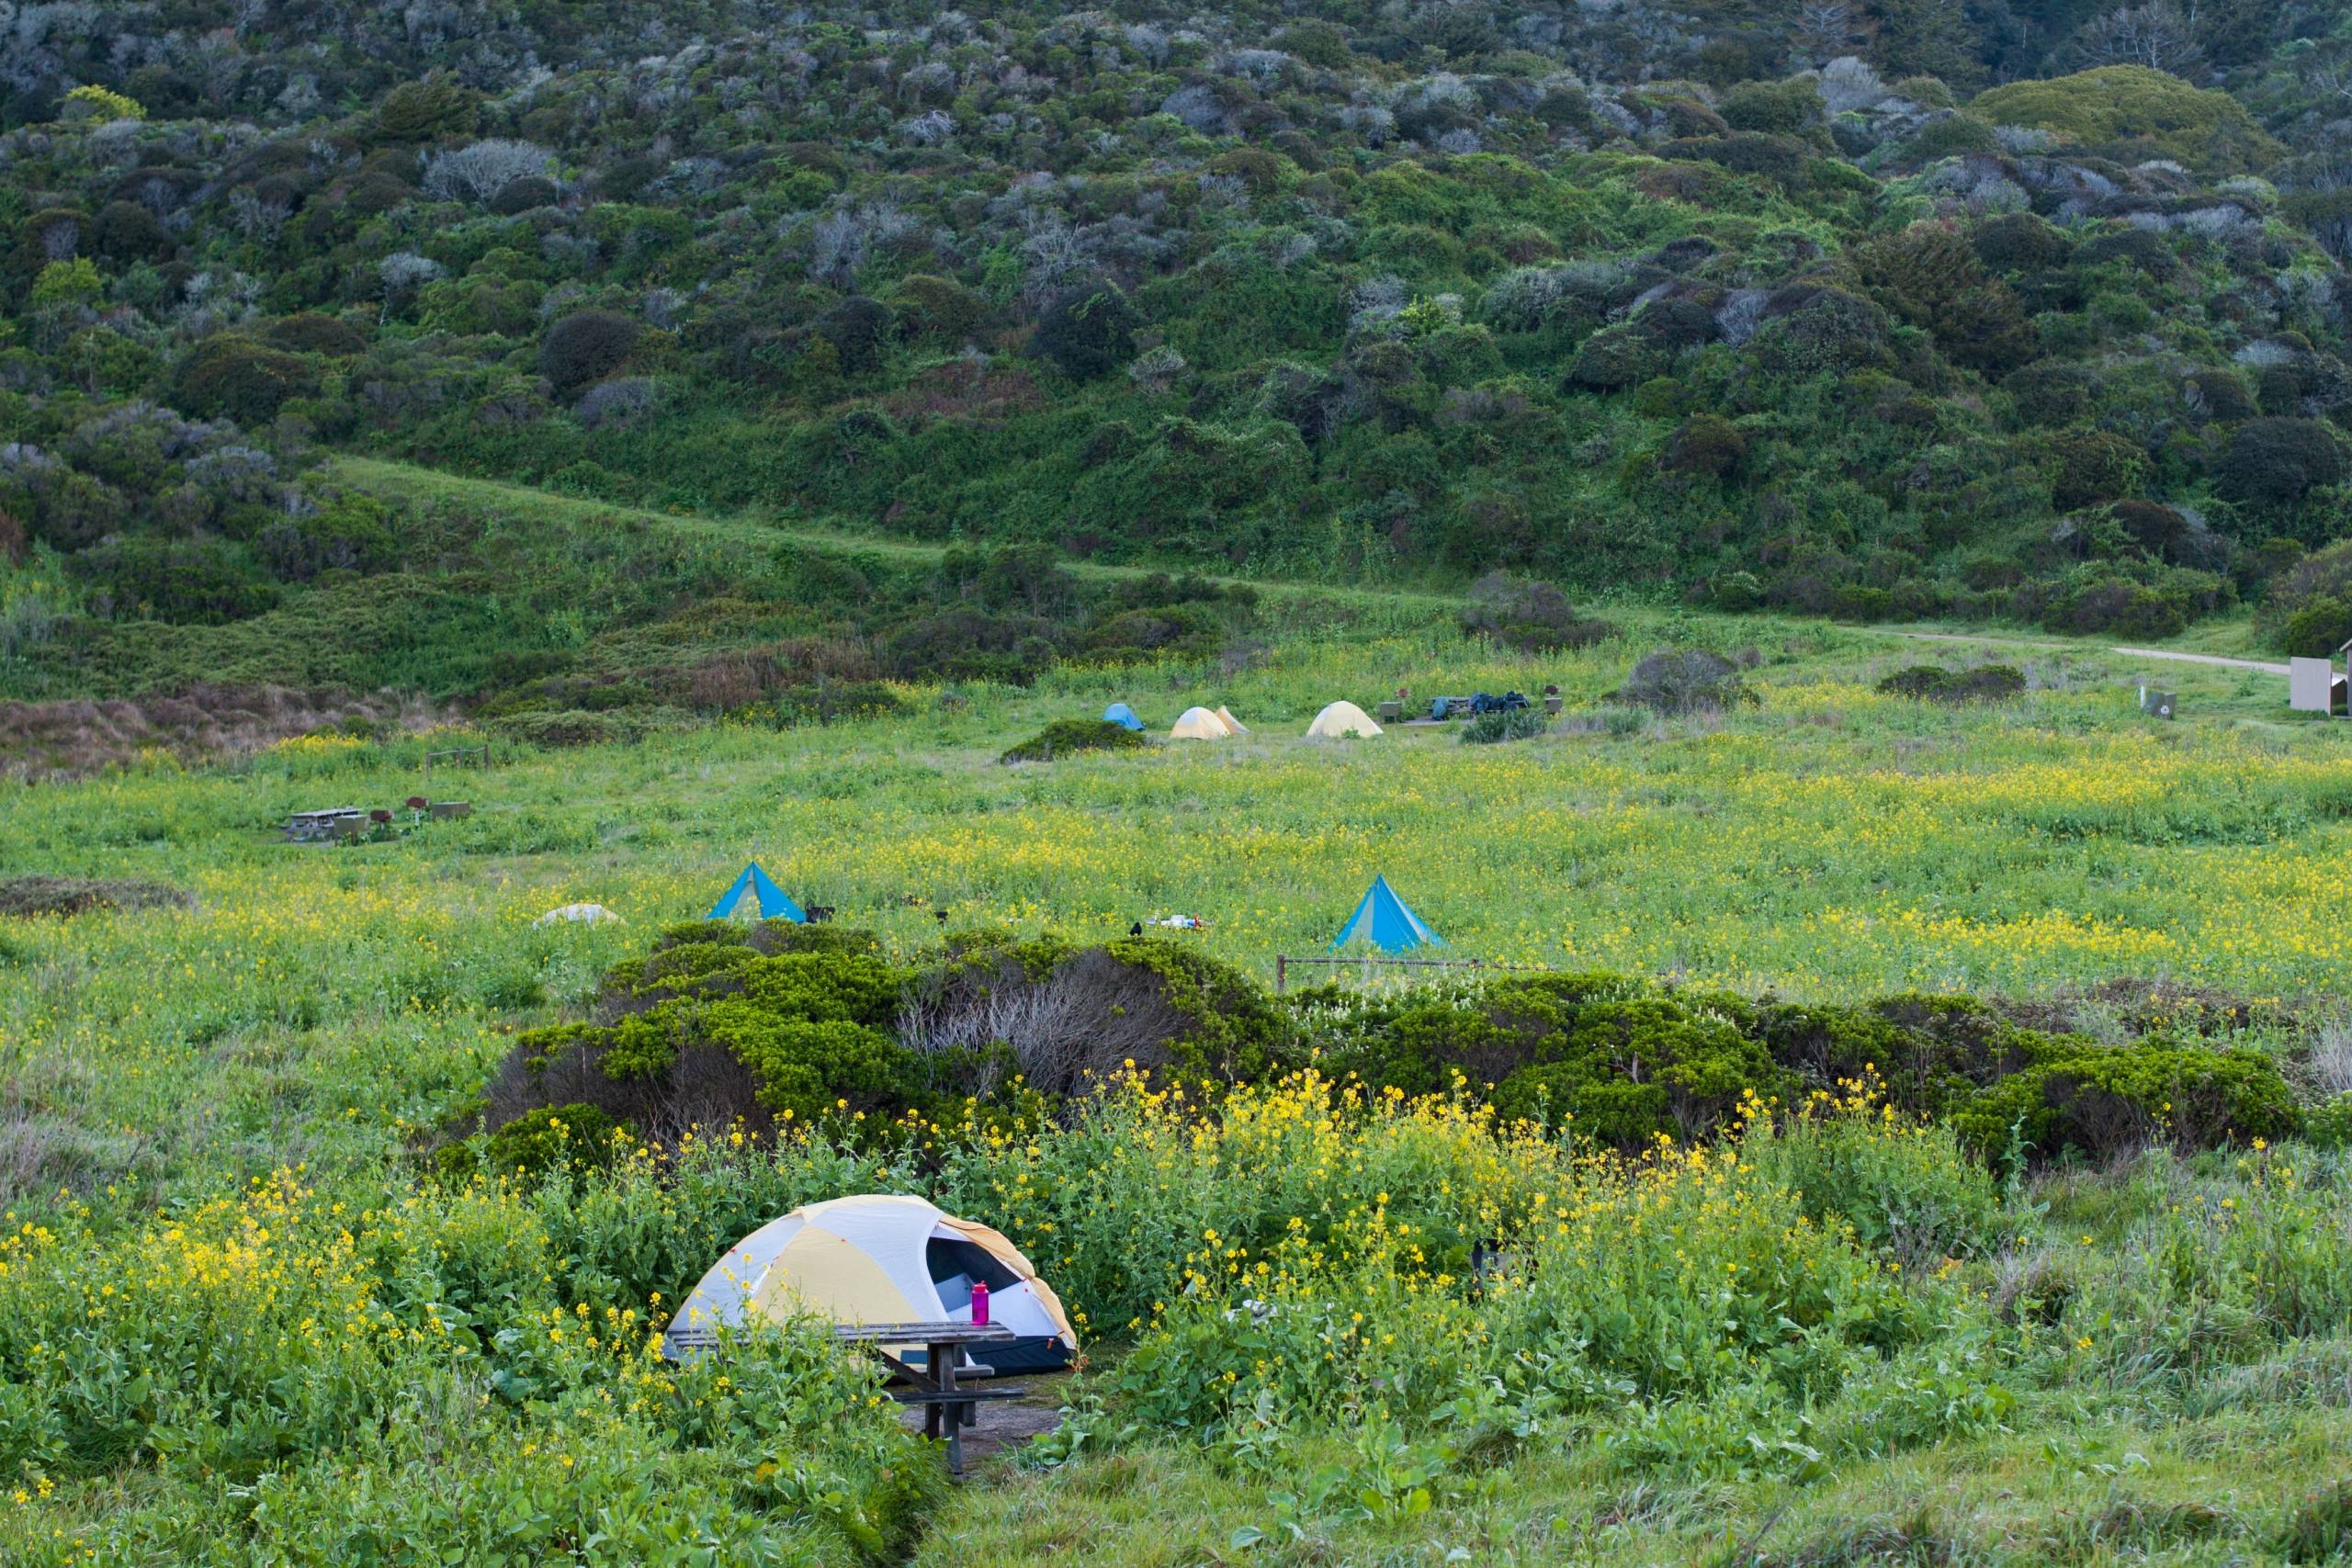 Tents in a big green meadow.